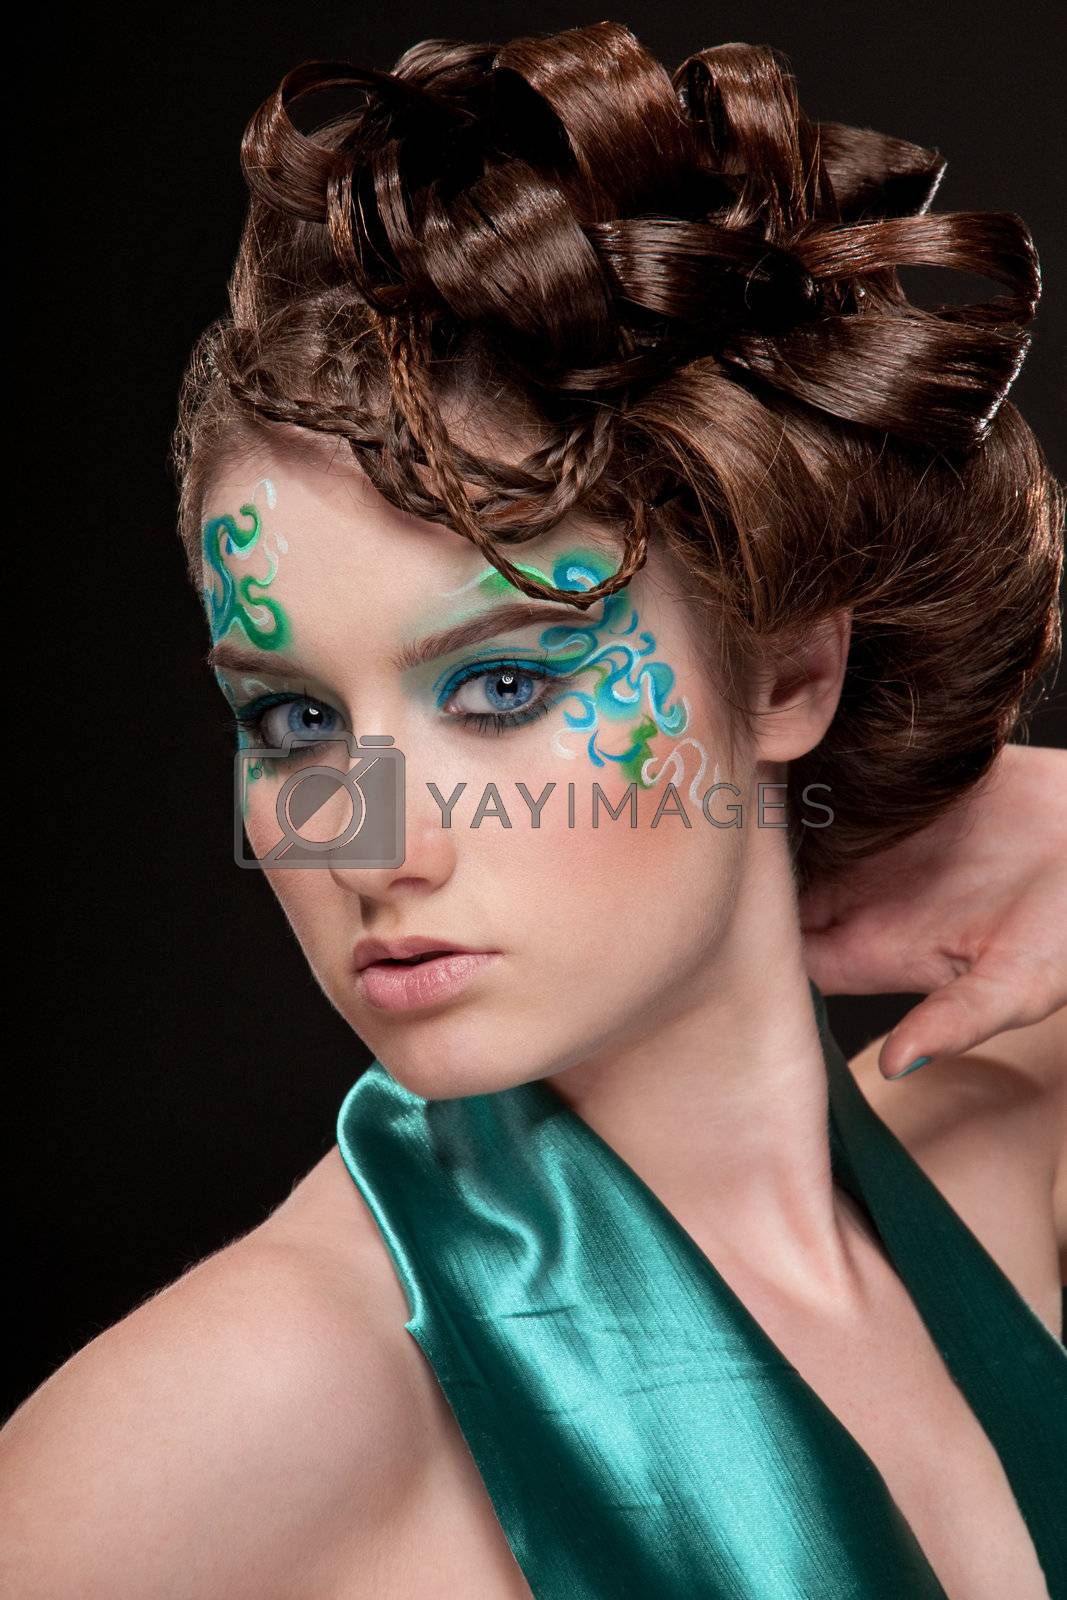 Royalty free image of Close-up portrait of sprite girl with faceart by markin